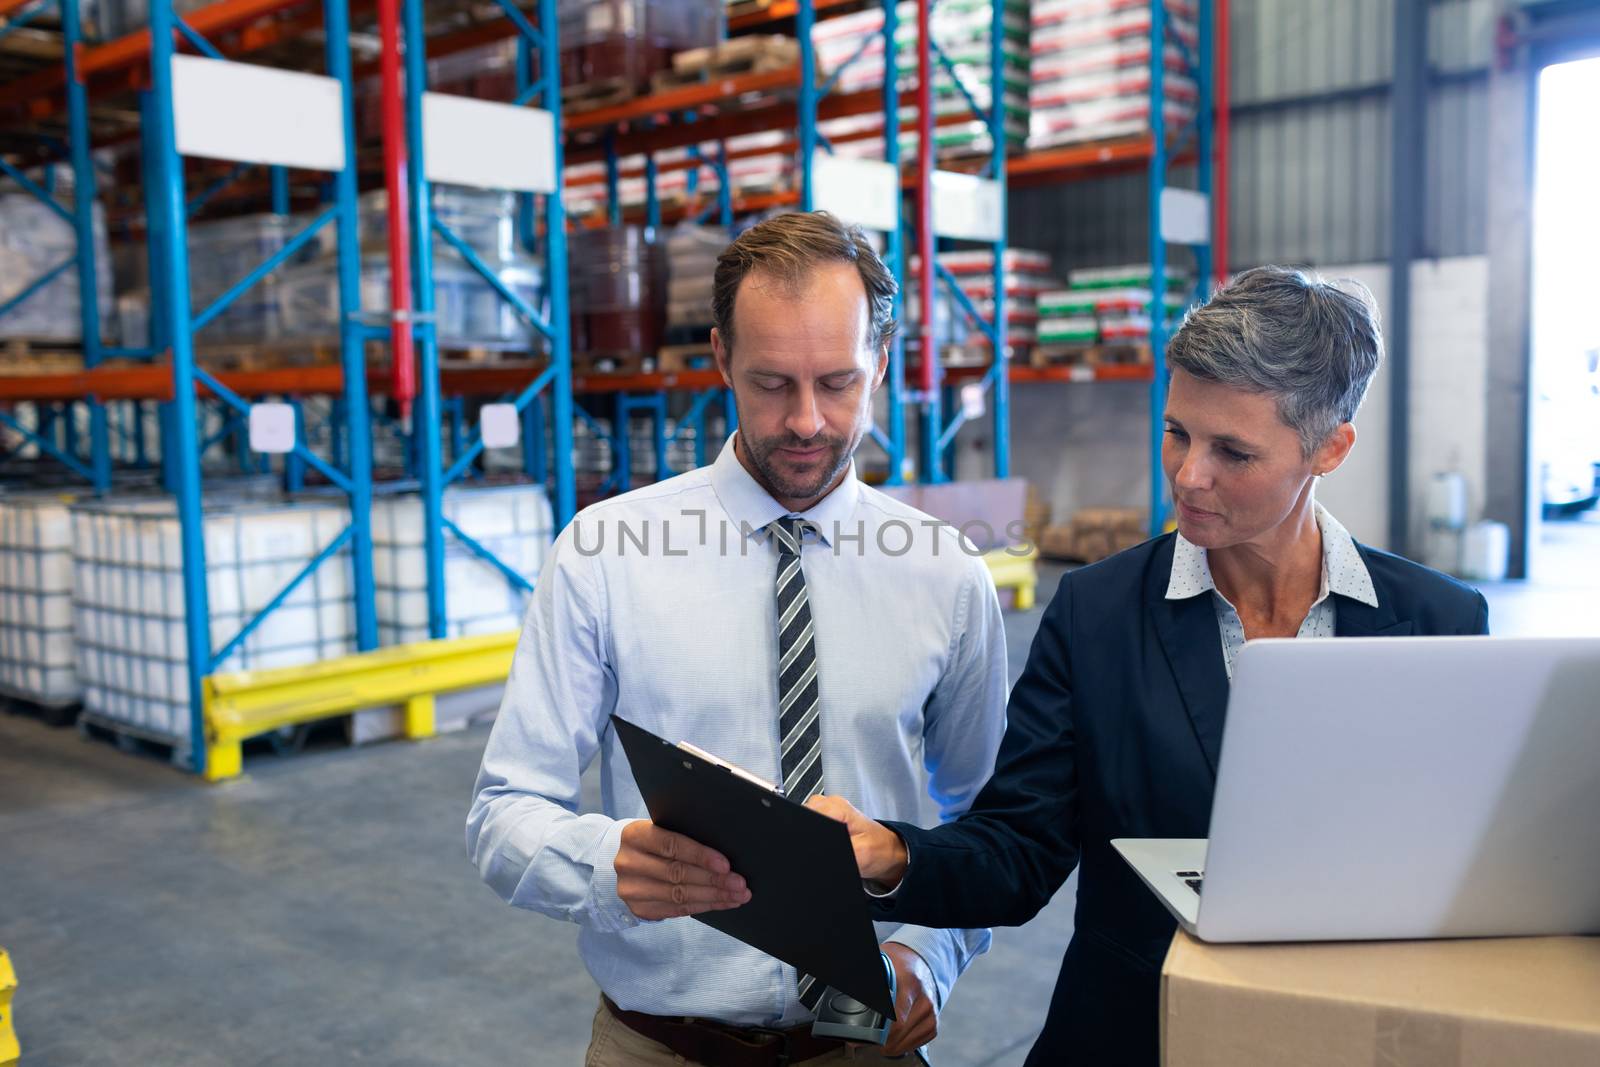 Staffs working together on laptop in warehouse by Wavebreakmedia